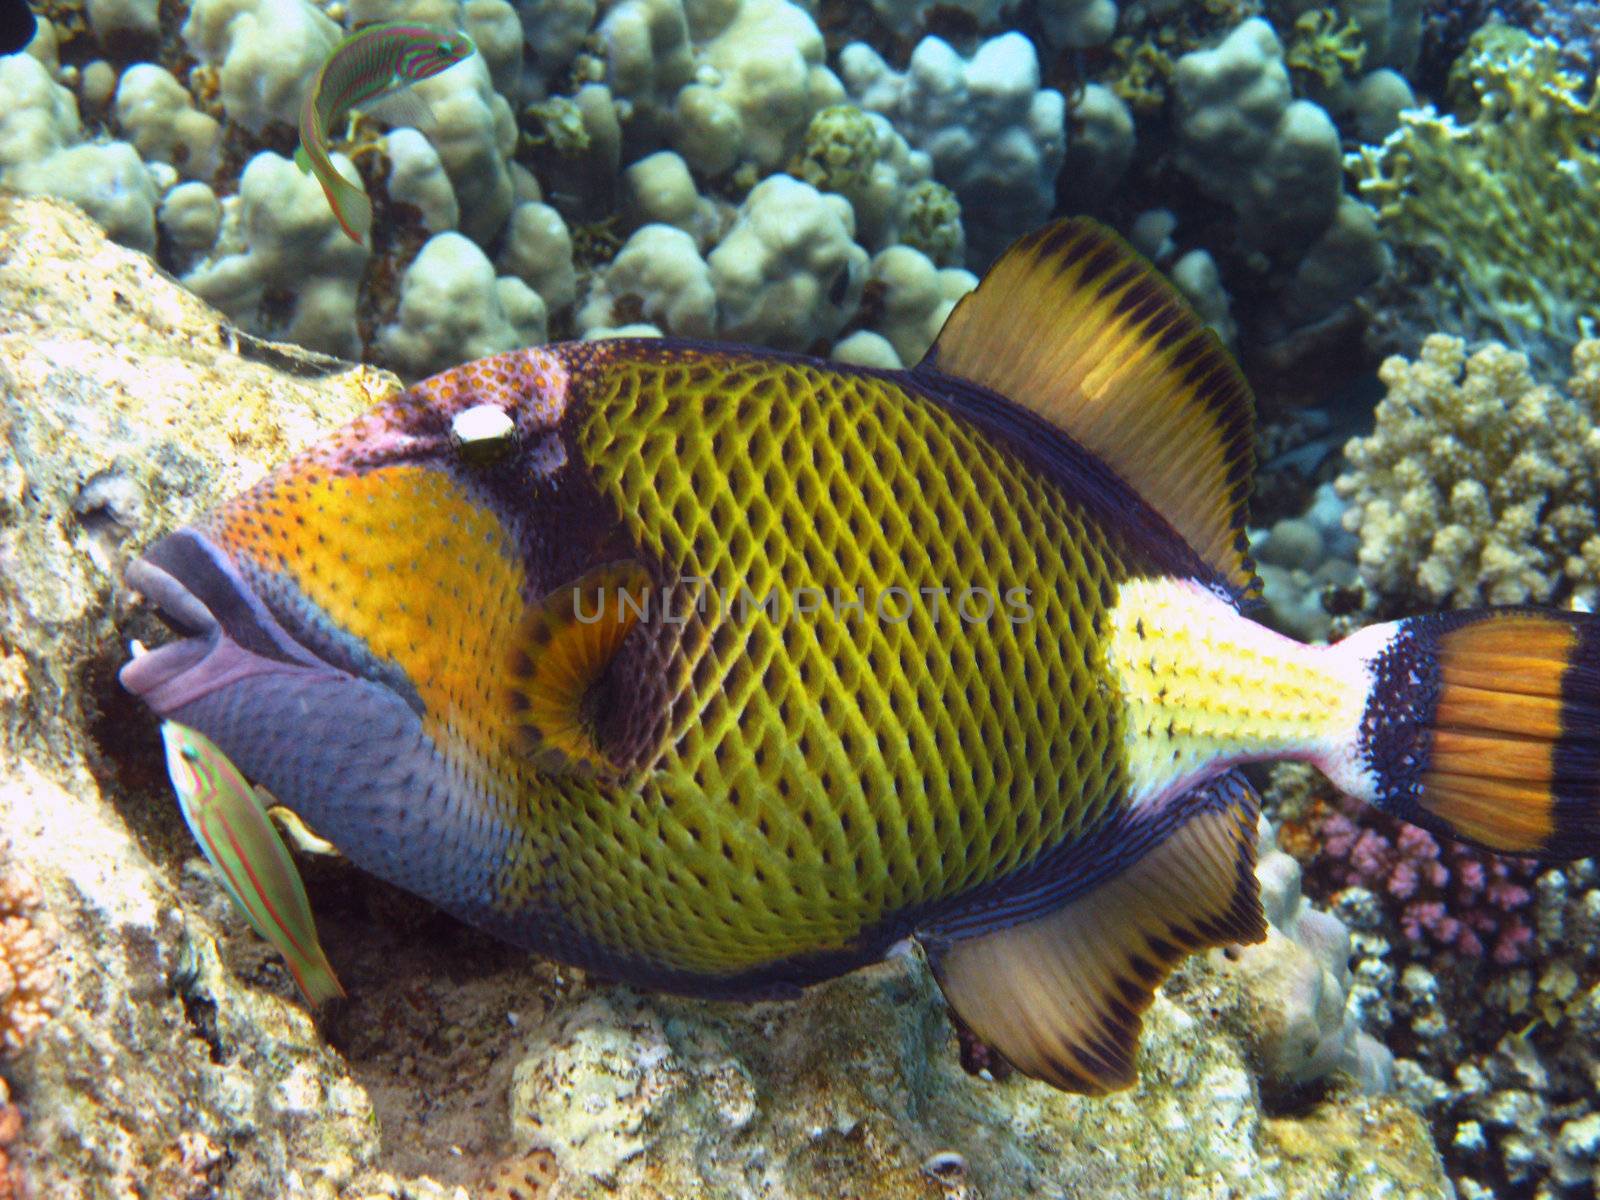 Titan triggerfish and coral reef in Red sea